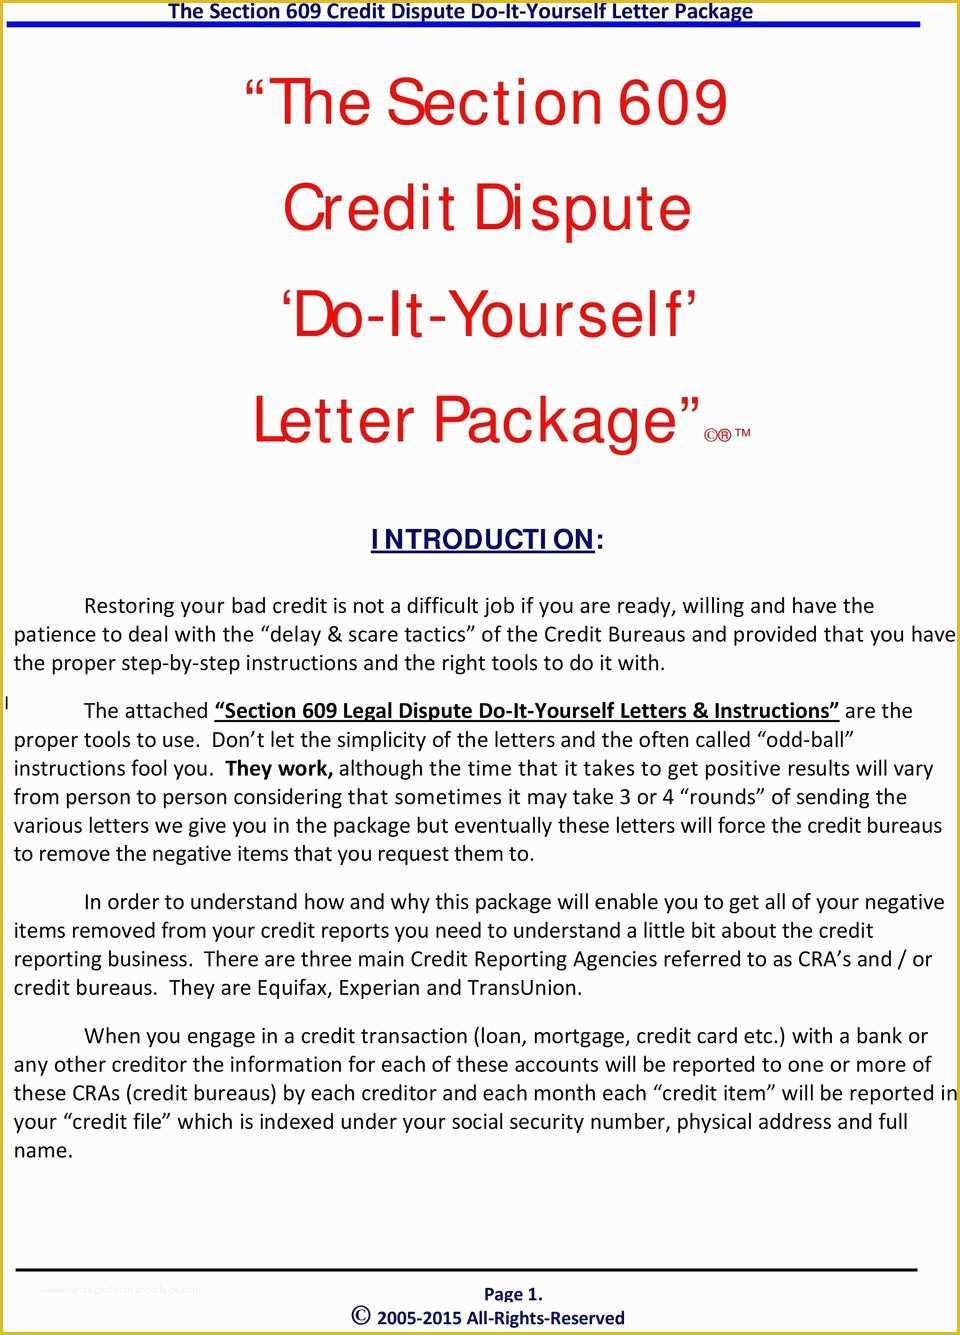 Free Section 609 Credit Dispute Letter Template Of the Section 609